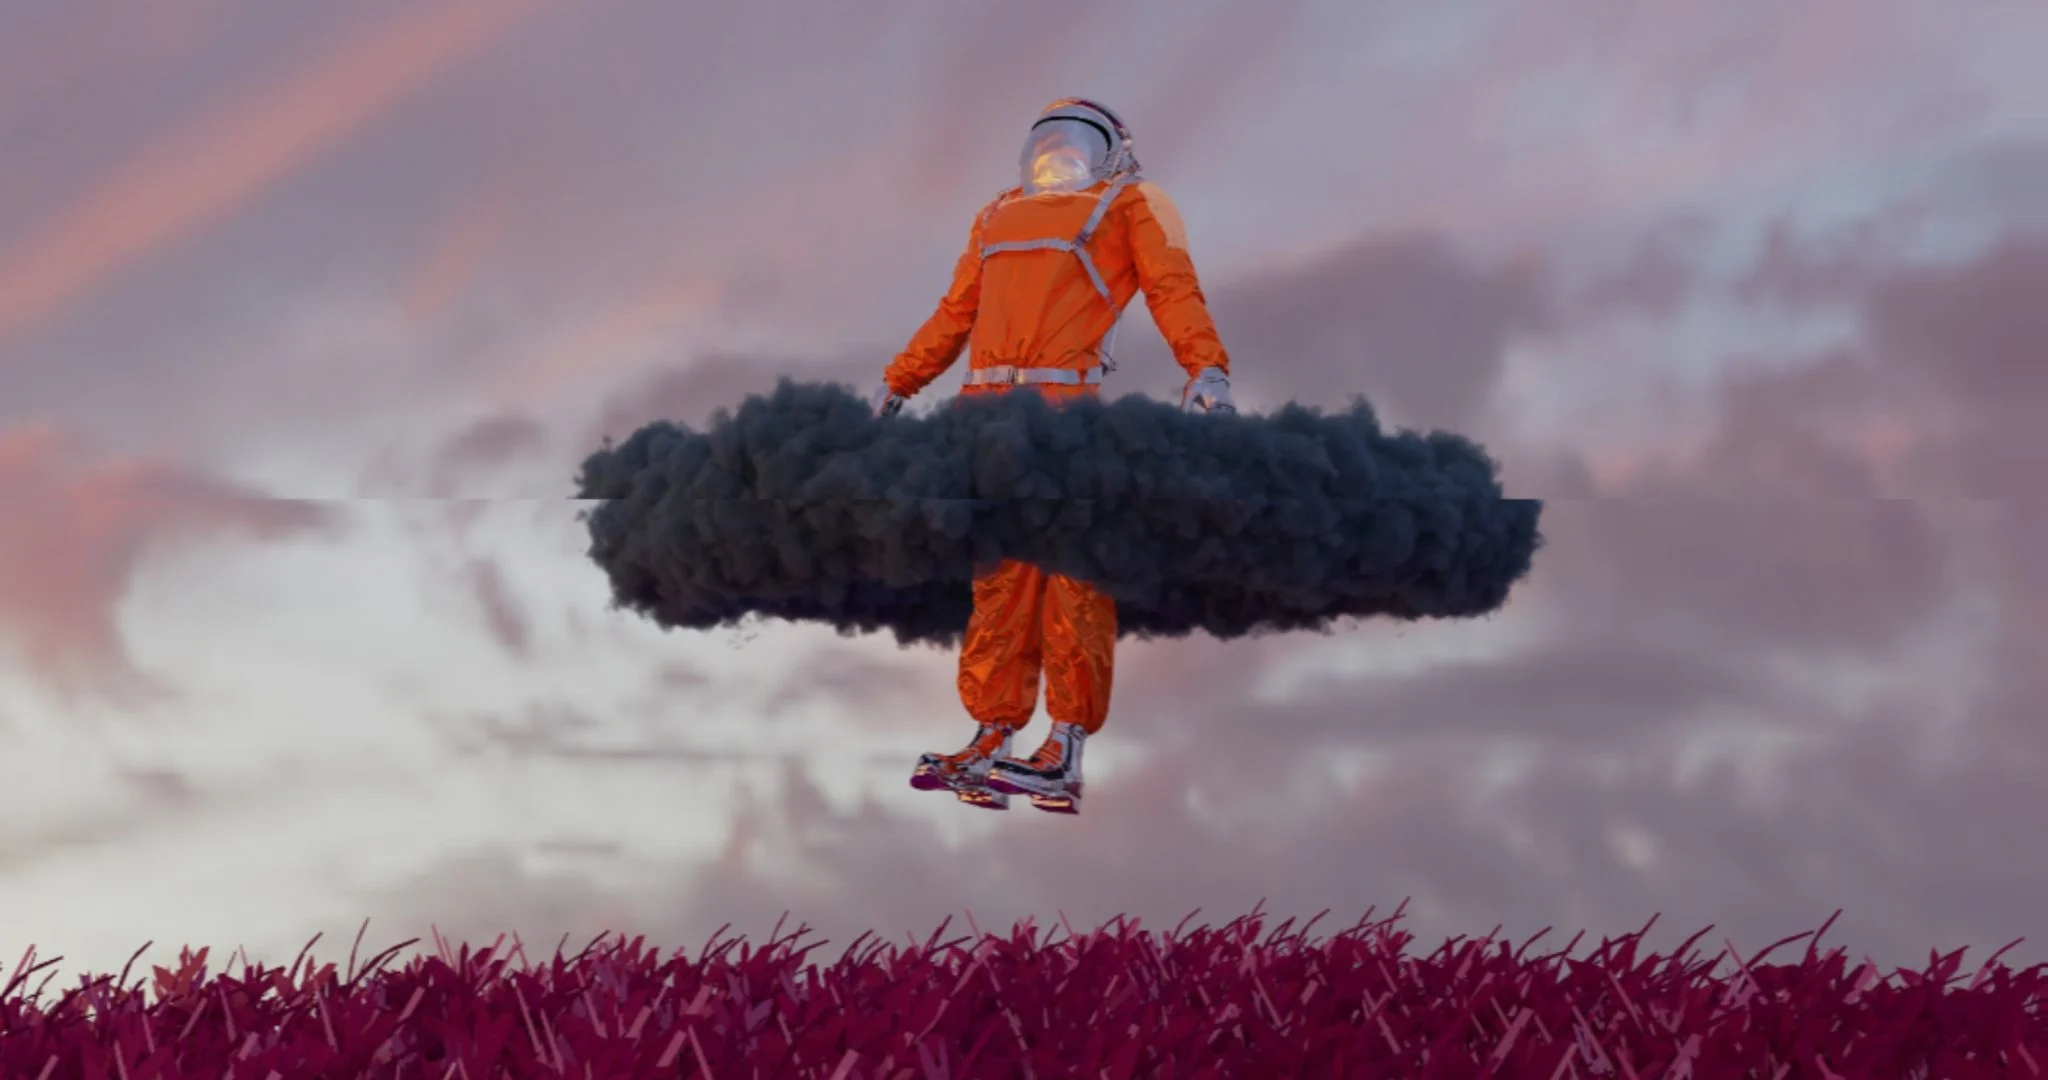 A digital hill of red grass, with an astronaut suit stuck in a black cloud, and the sky in the background. Source: Sharan Pagadala / Unsplash